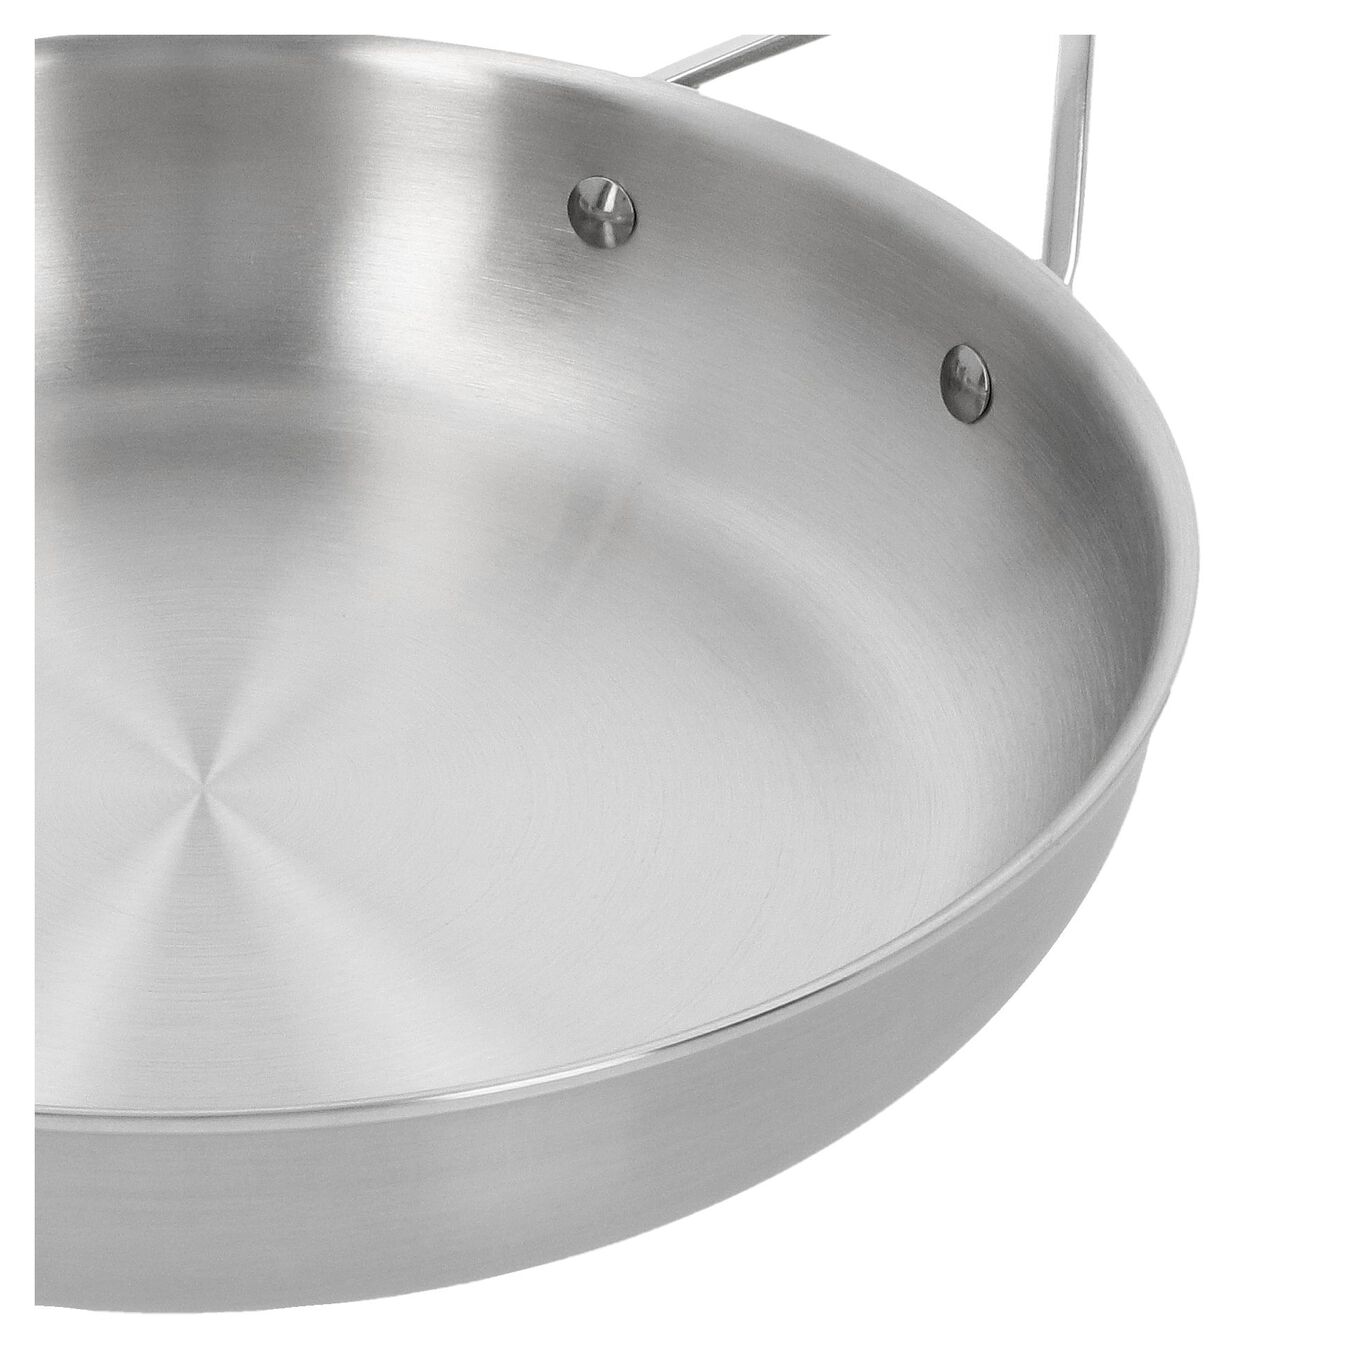 28 cm / 11 inch 18/10 Stainless Steel Frying pan,,large 7